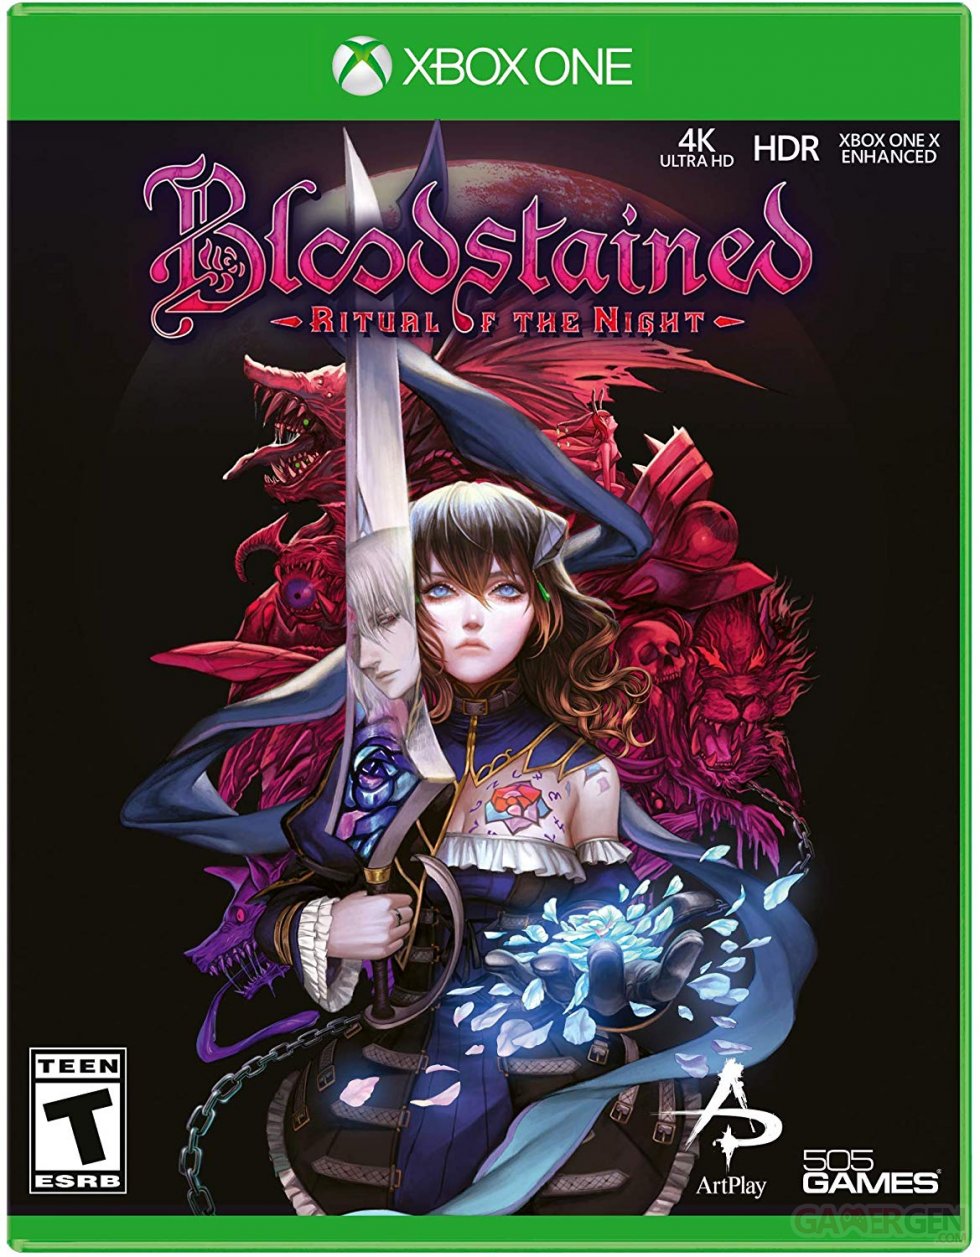 Bloodstained-Ritual-of-the-Night_23-02-2019_jaquette-3